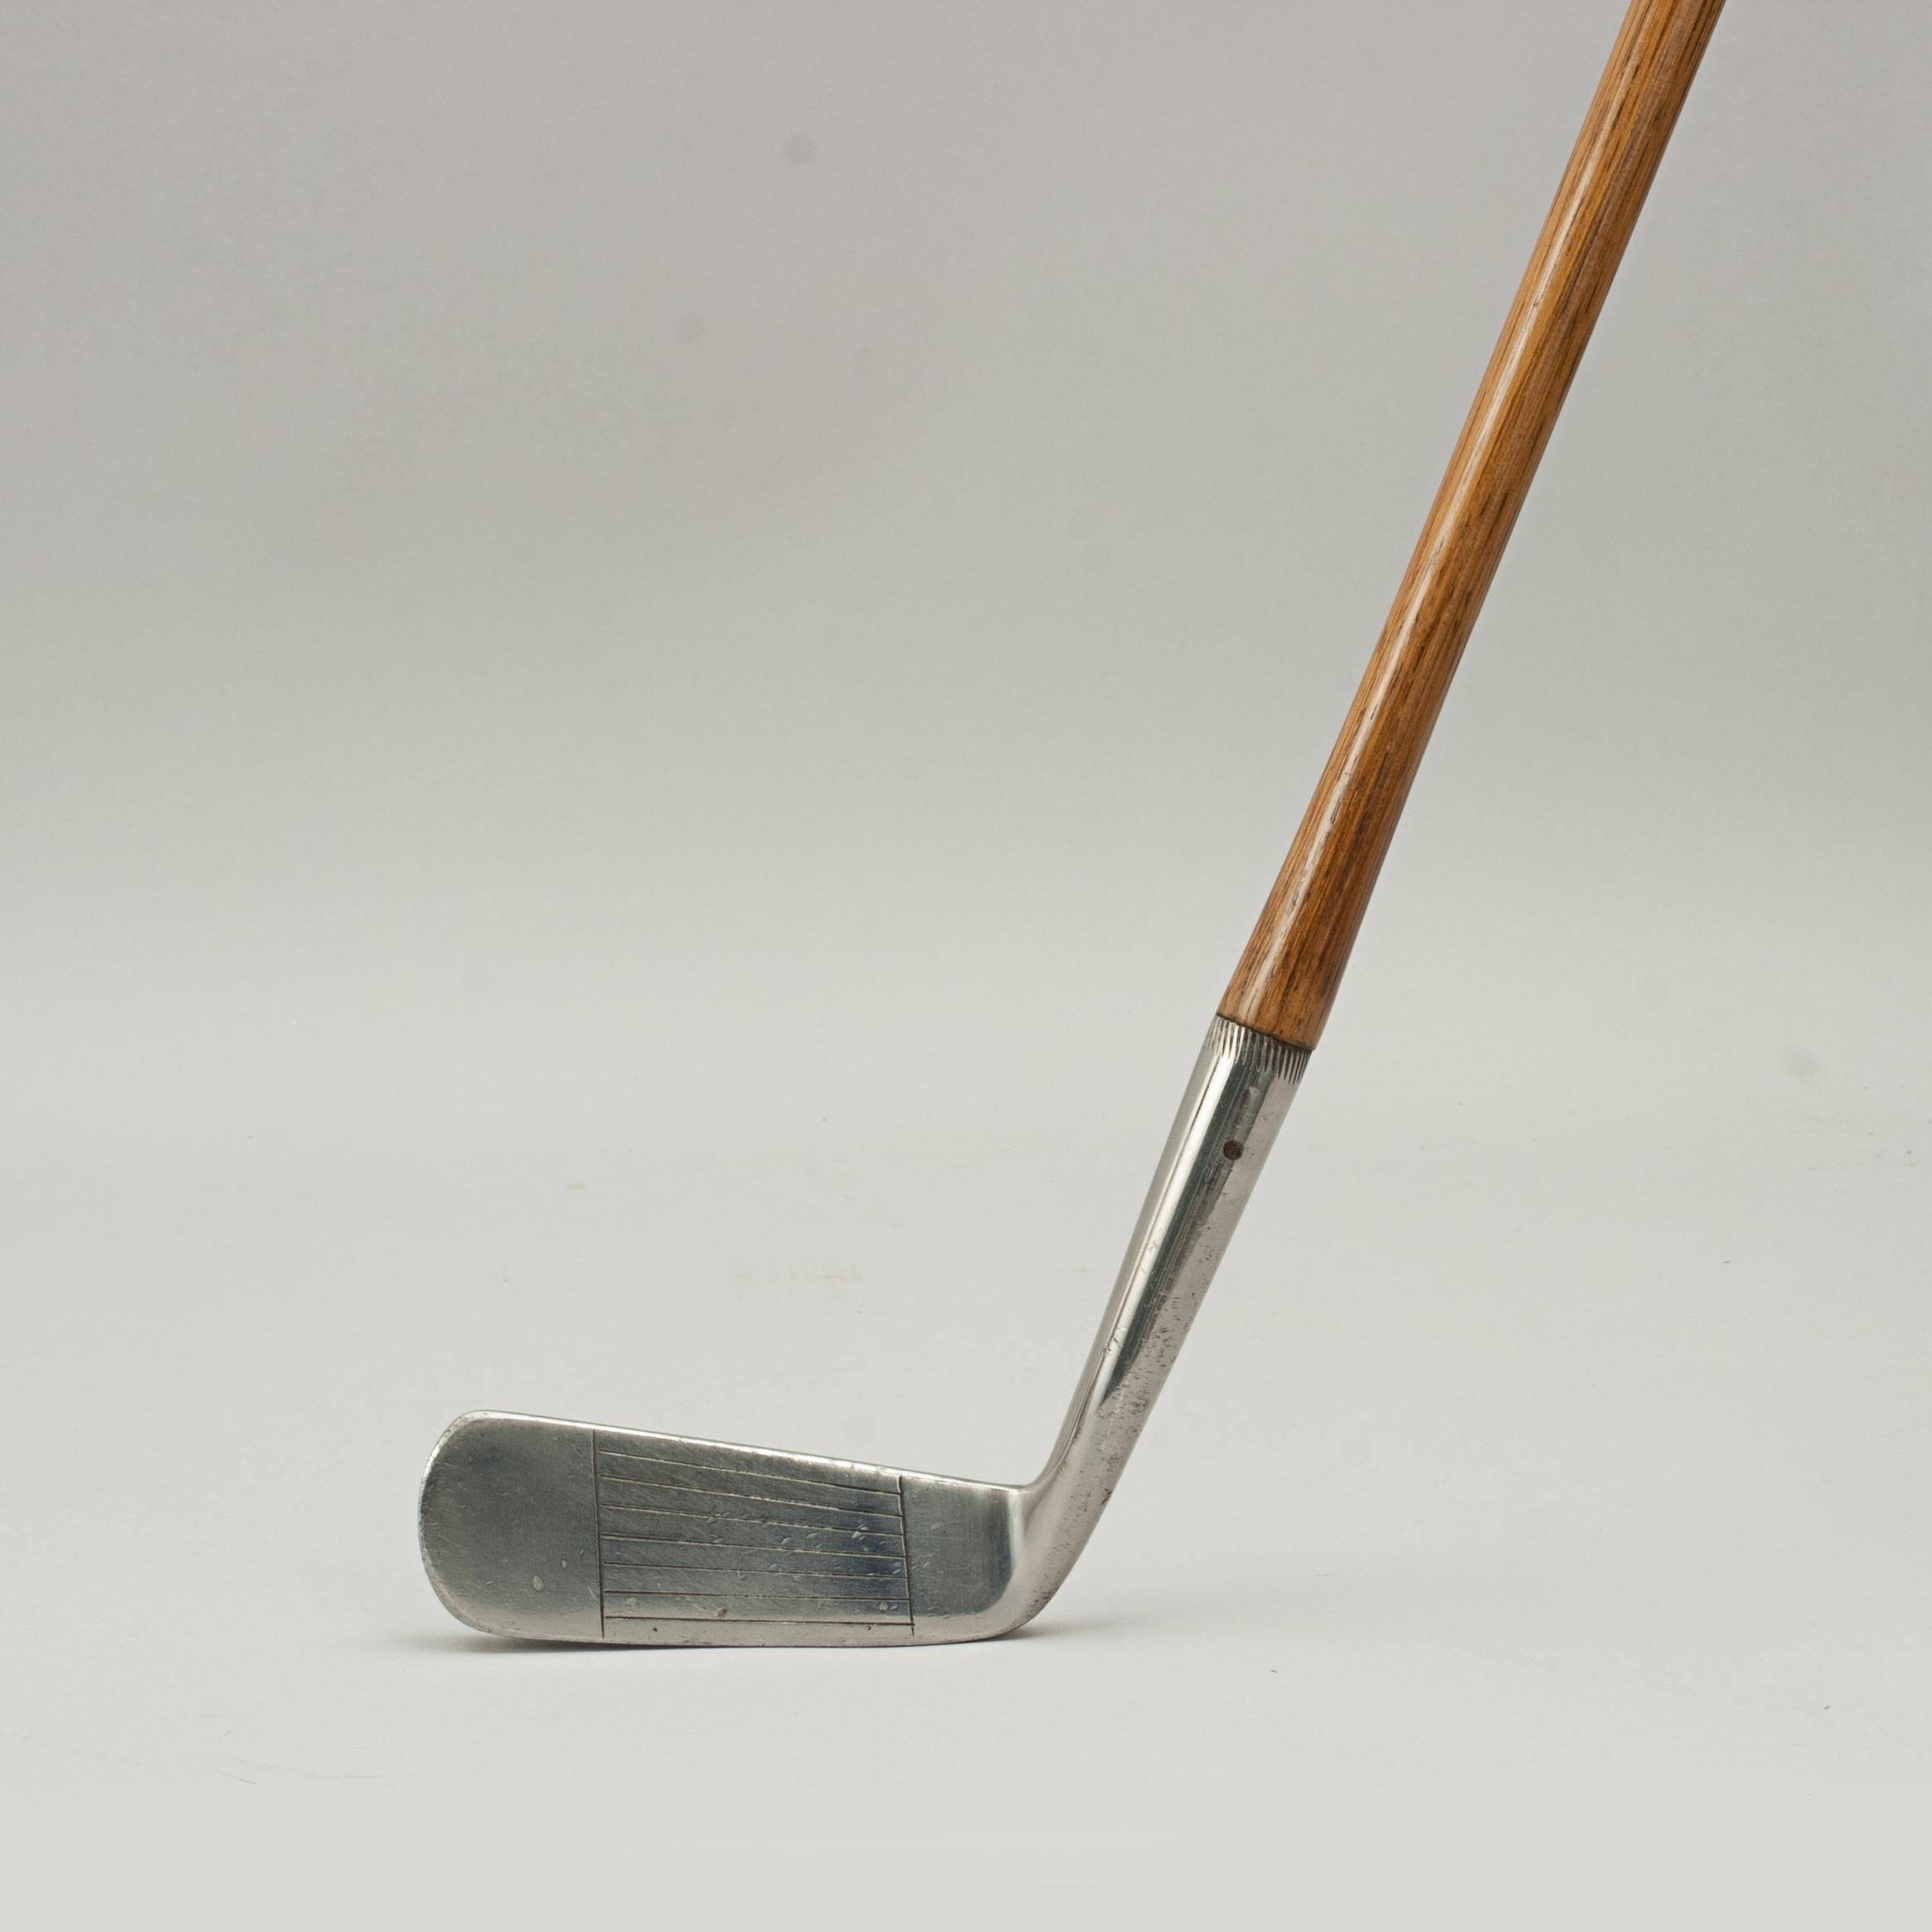 Iron Hickory Golf Club, Spalding Wryneck Putter